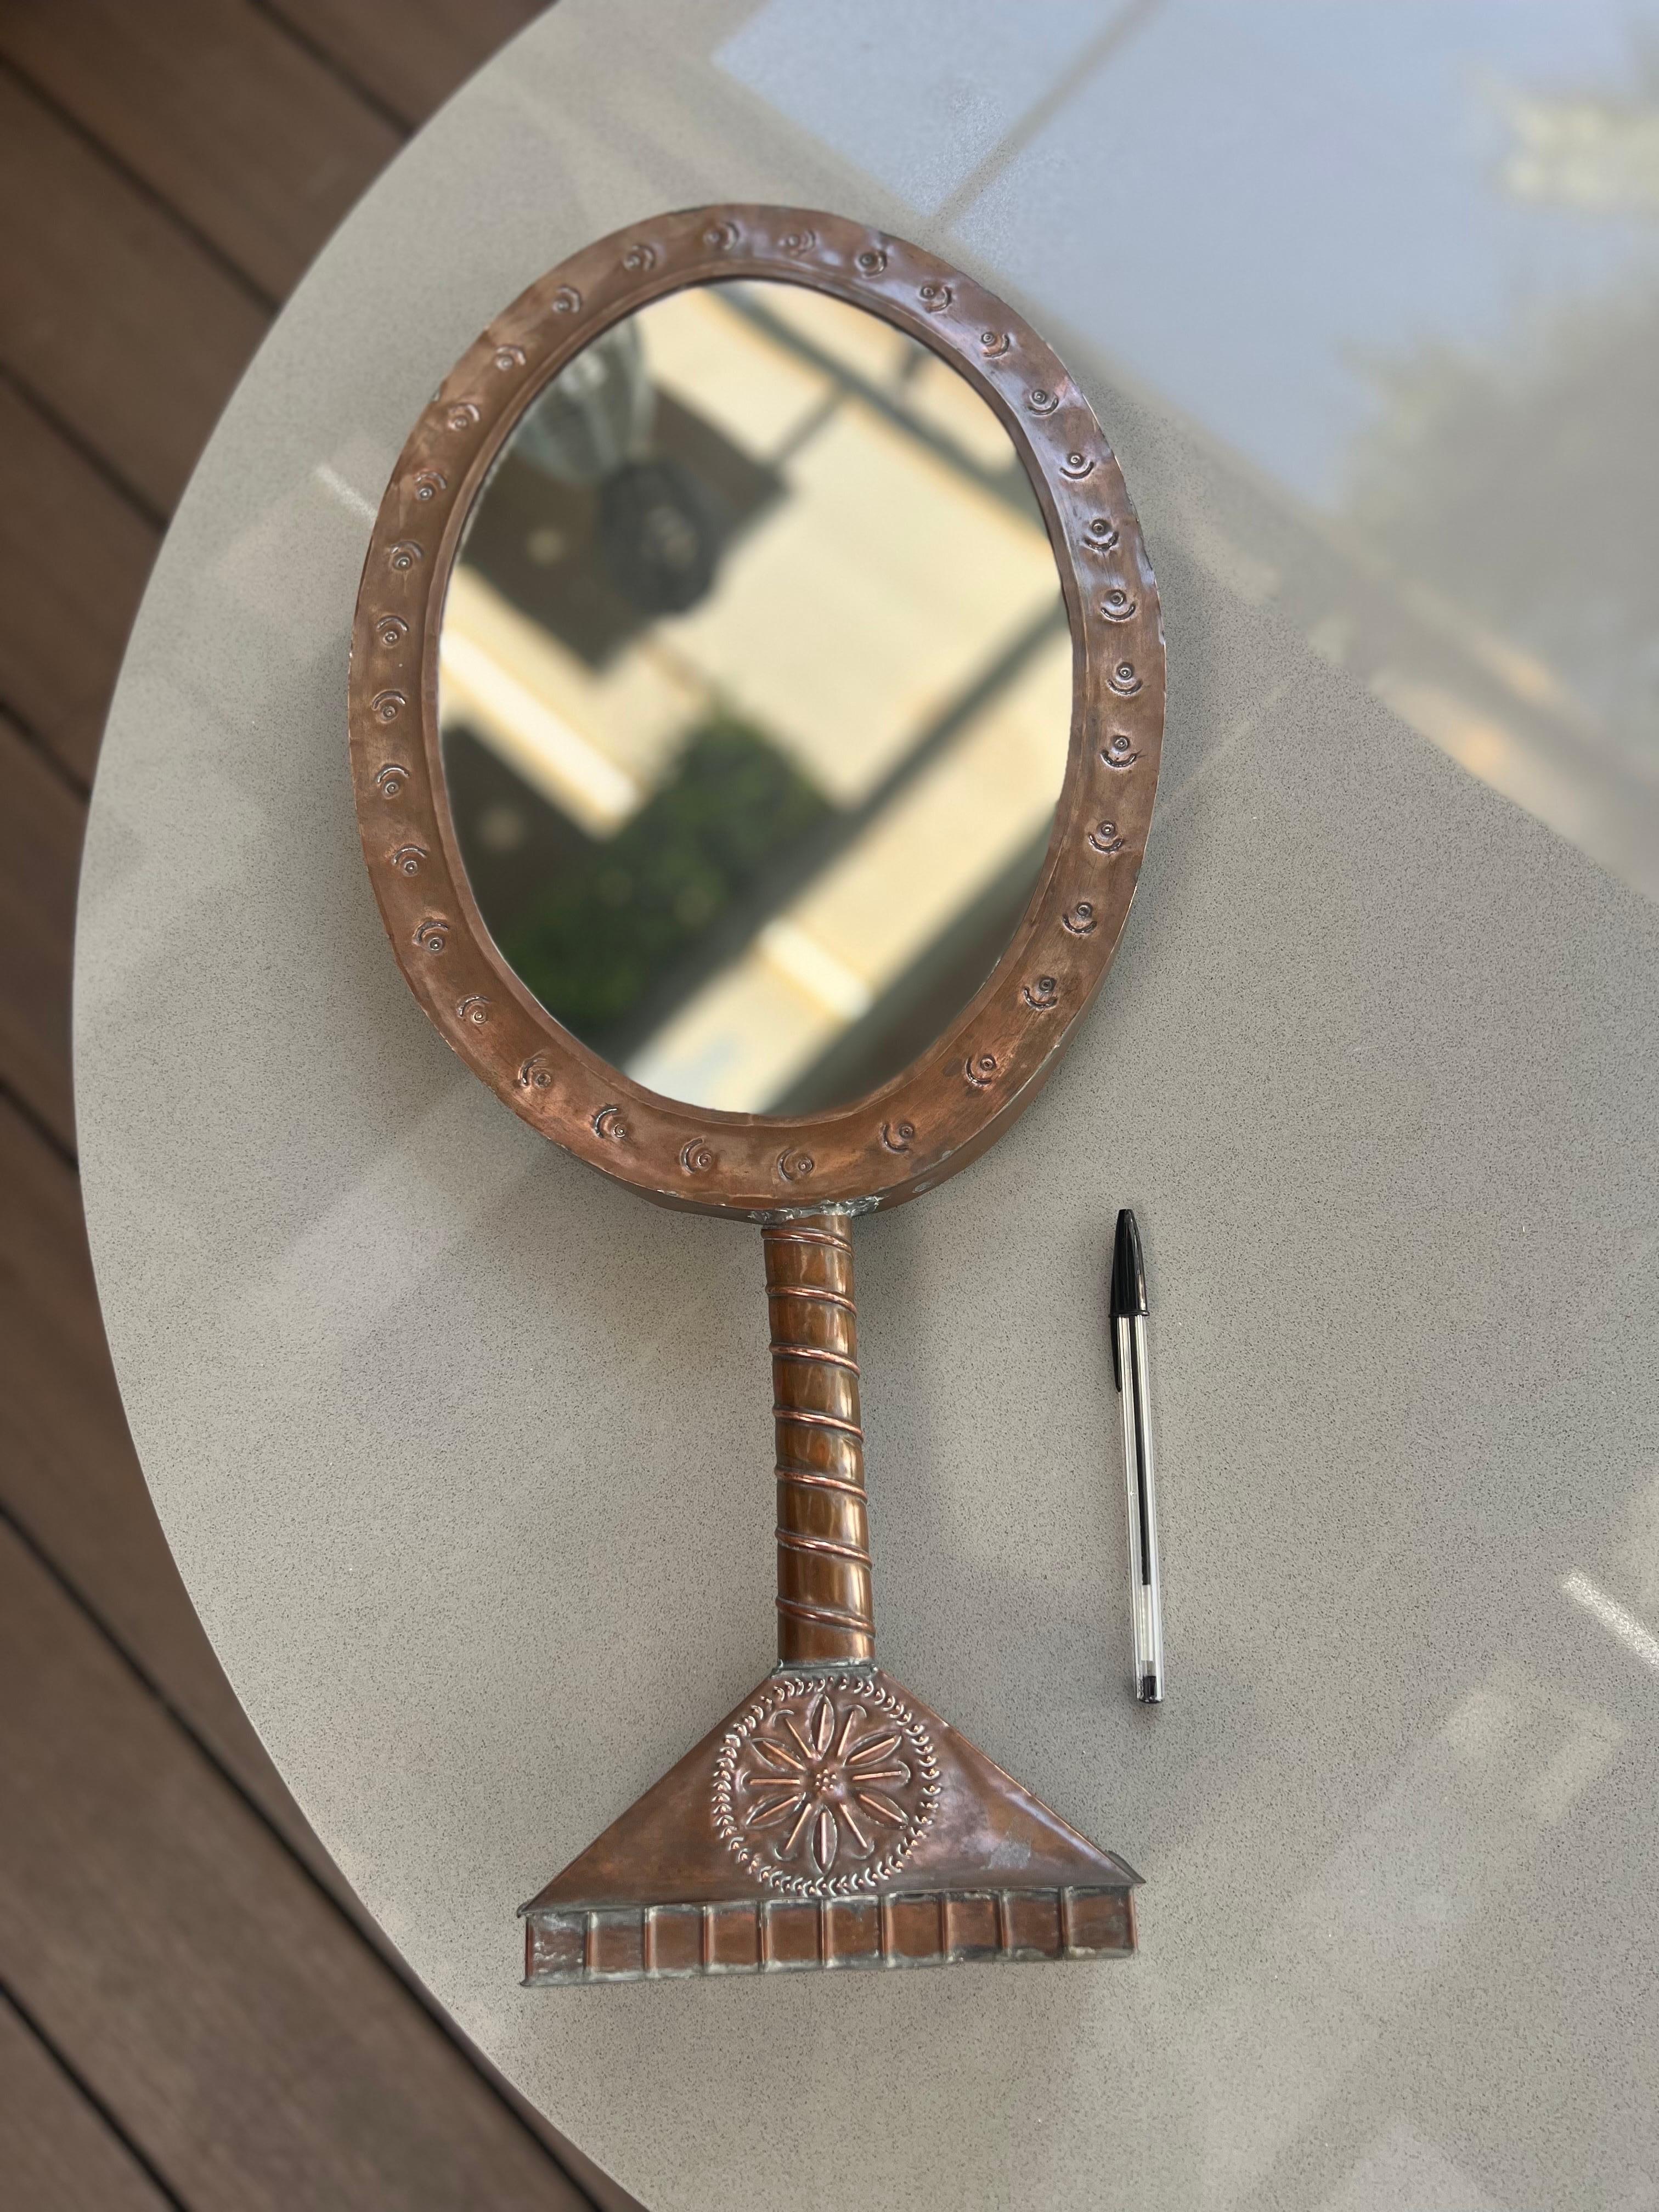 For your consideration one of her first pieces, this beautiful hand hammered copper Vanity mirror. Made and signed by Gene Byron, a Canadian artist, who moved to Marfil, Guanajuato, Mexico.
The property where she lived was donated to the state where